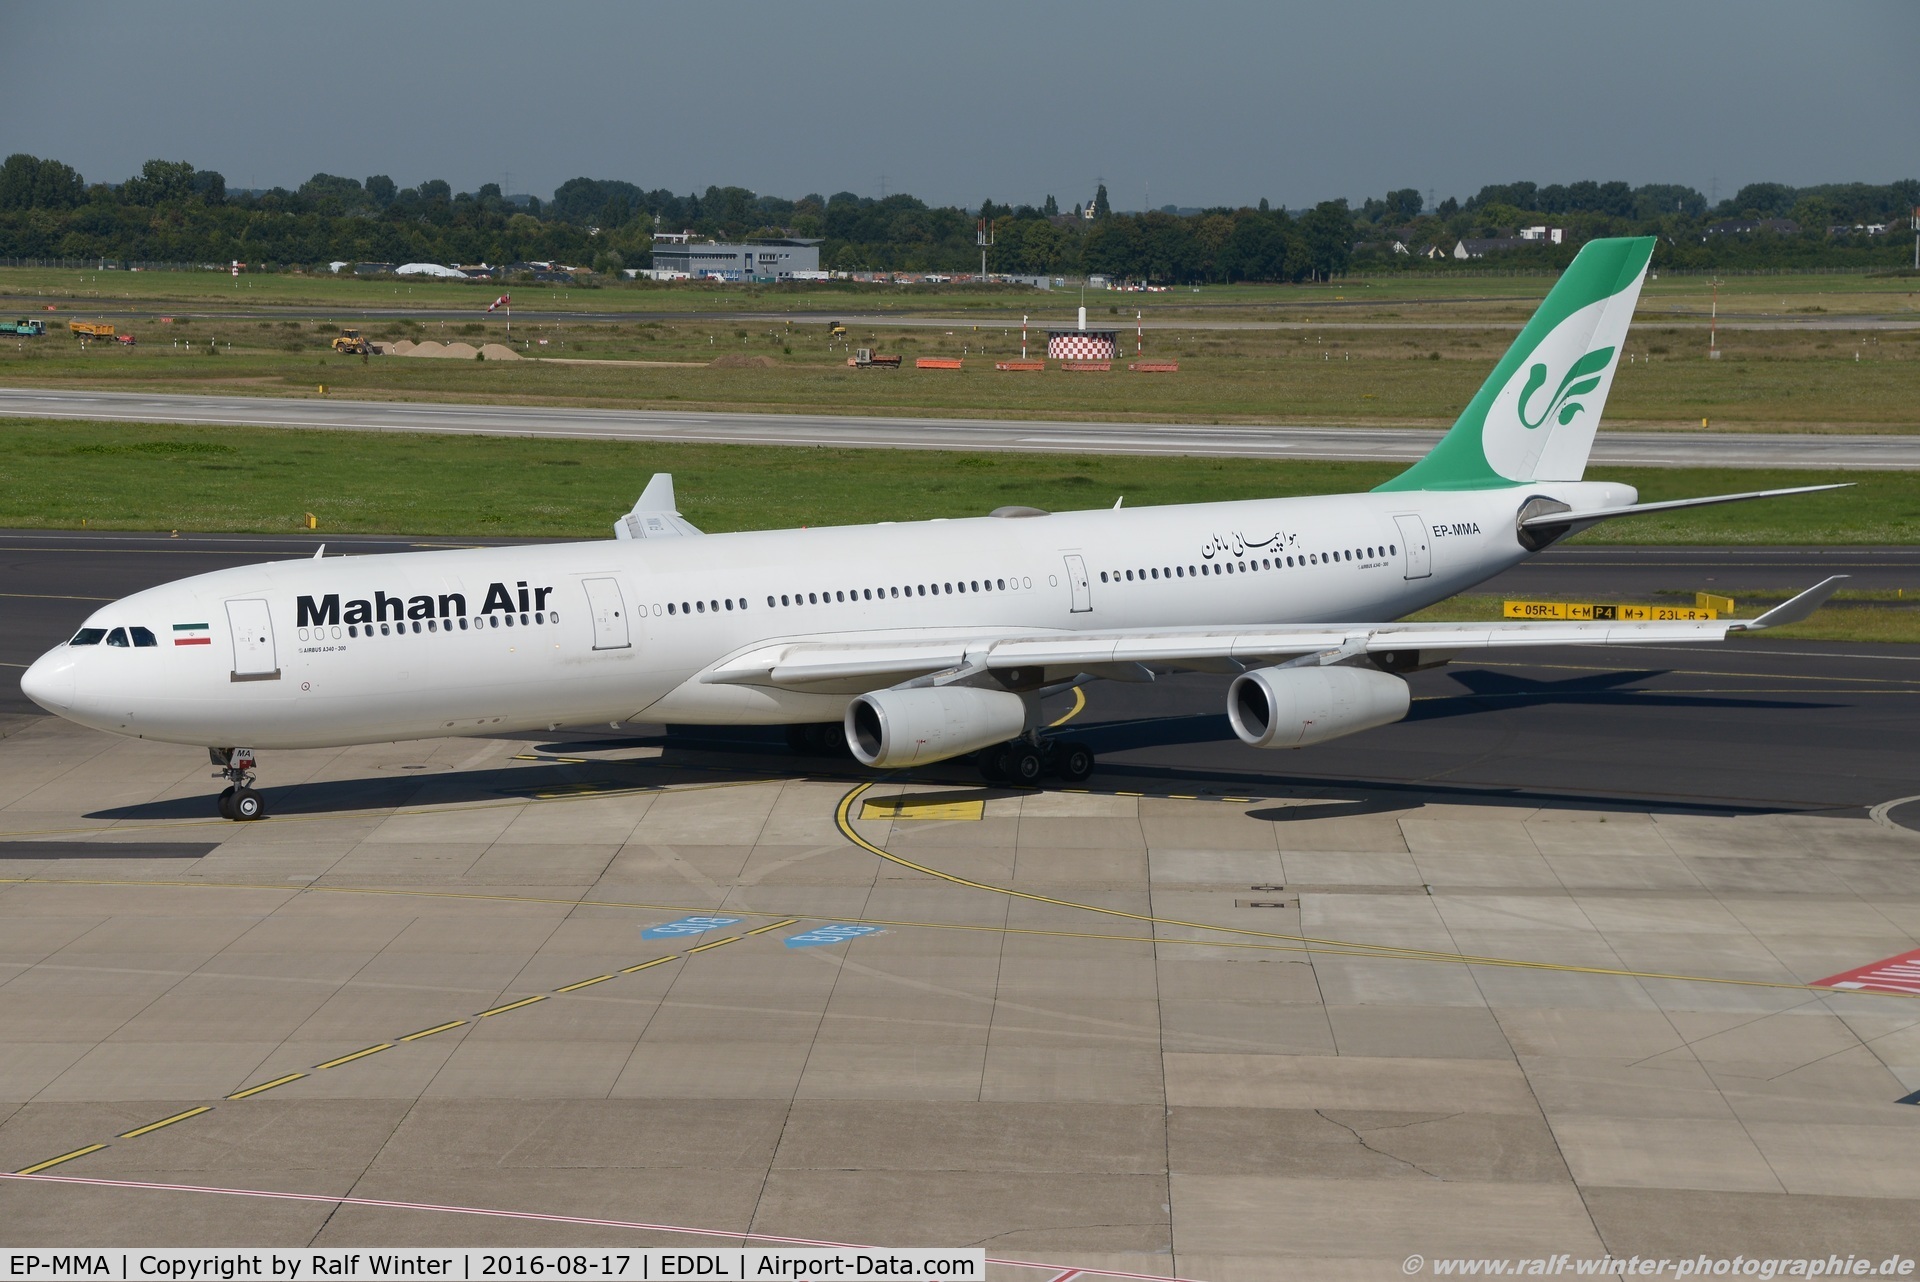 EP-MMA, 1993 Airbus A340-311 C/N 020, Airbus A340-311 - W5 IRM Mahan Airlines - 20 - EP-MMA - 17.08.2016 - DUS